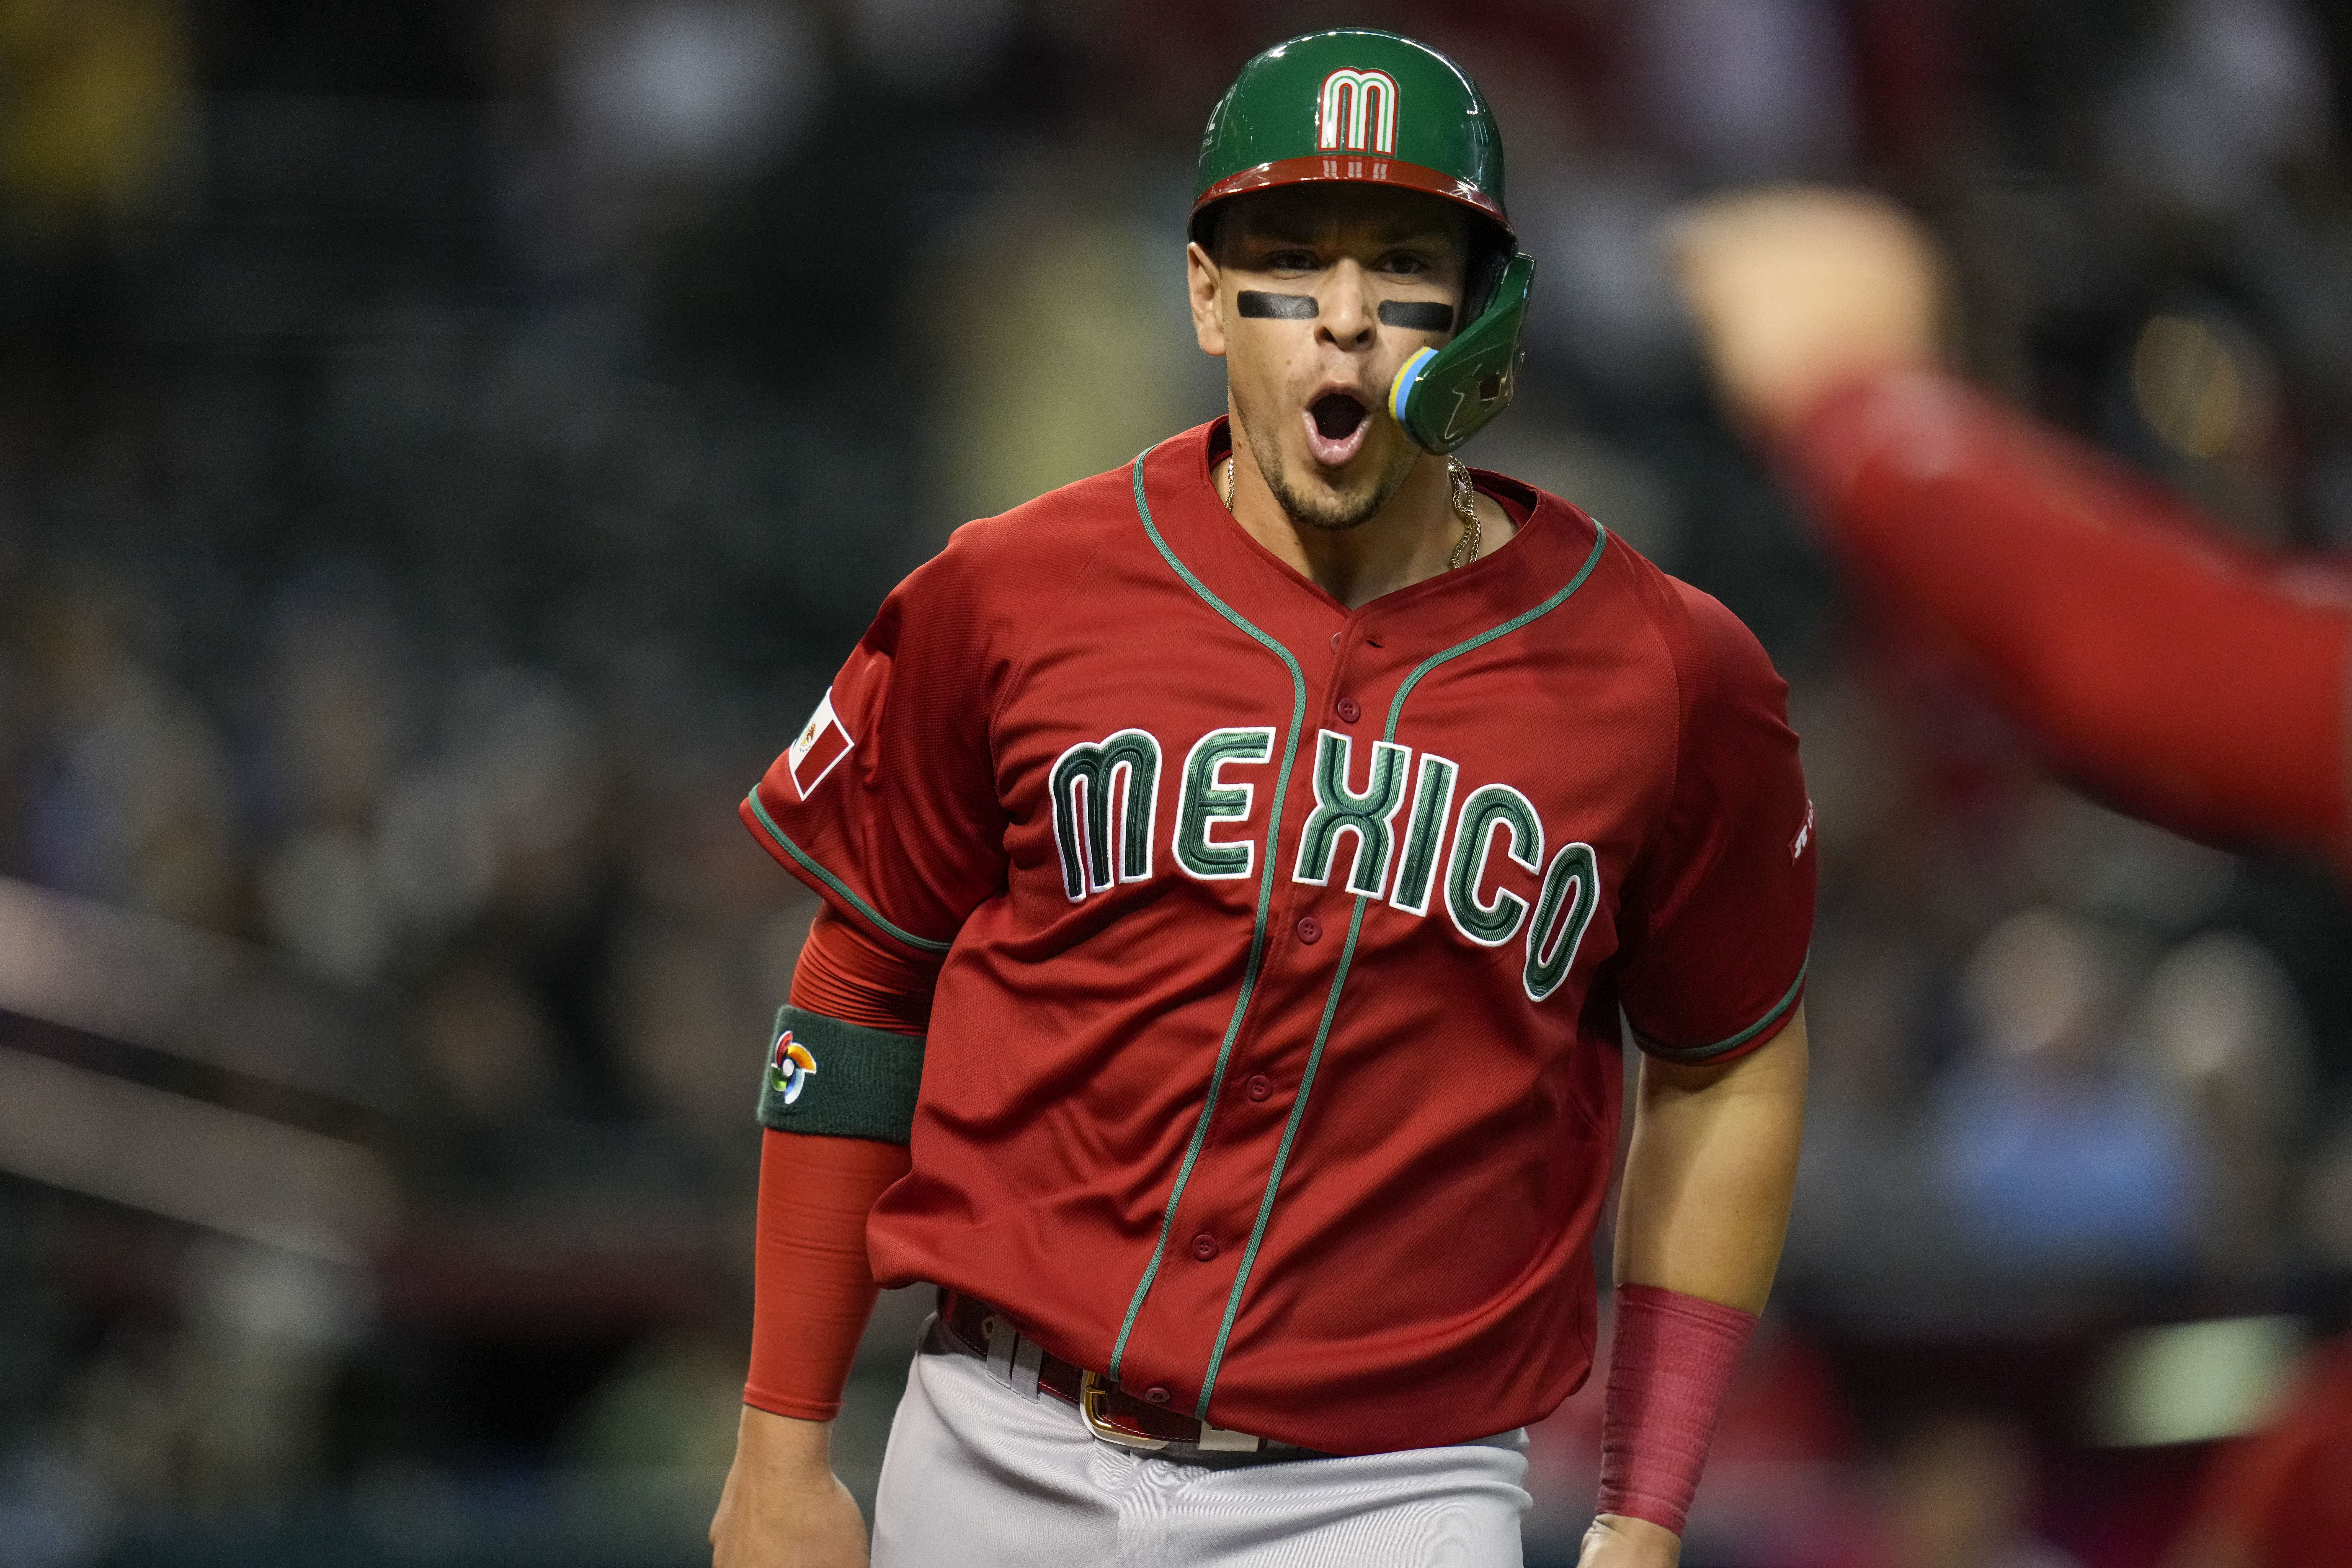 Storylines to watch for the 2023 World Baseball Classic